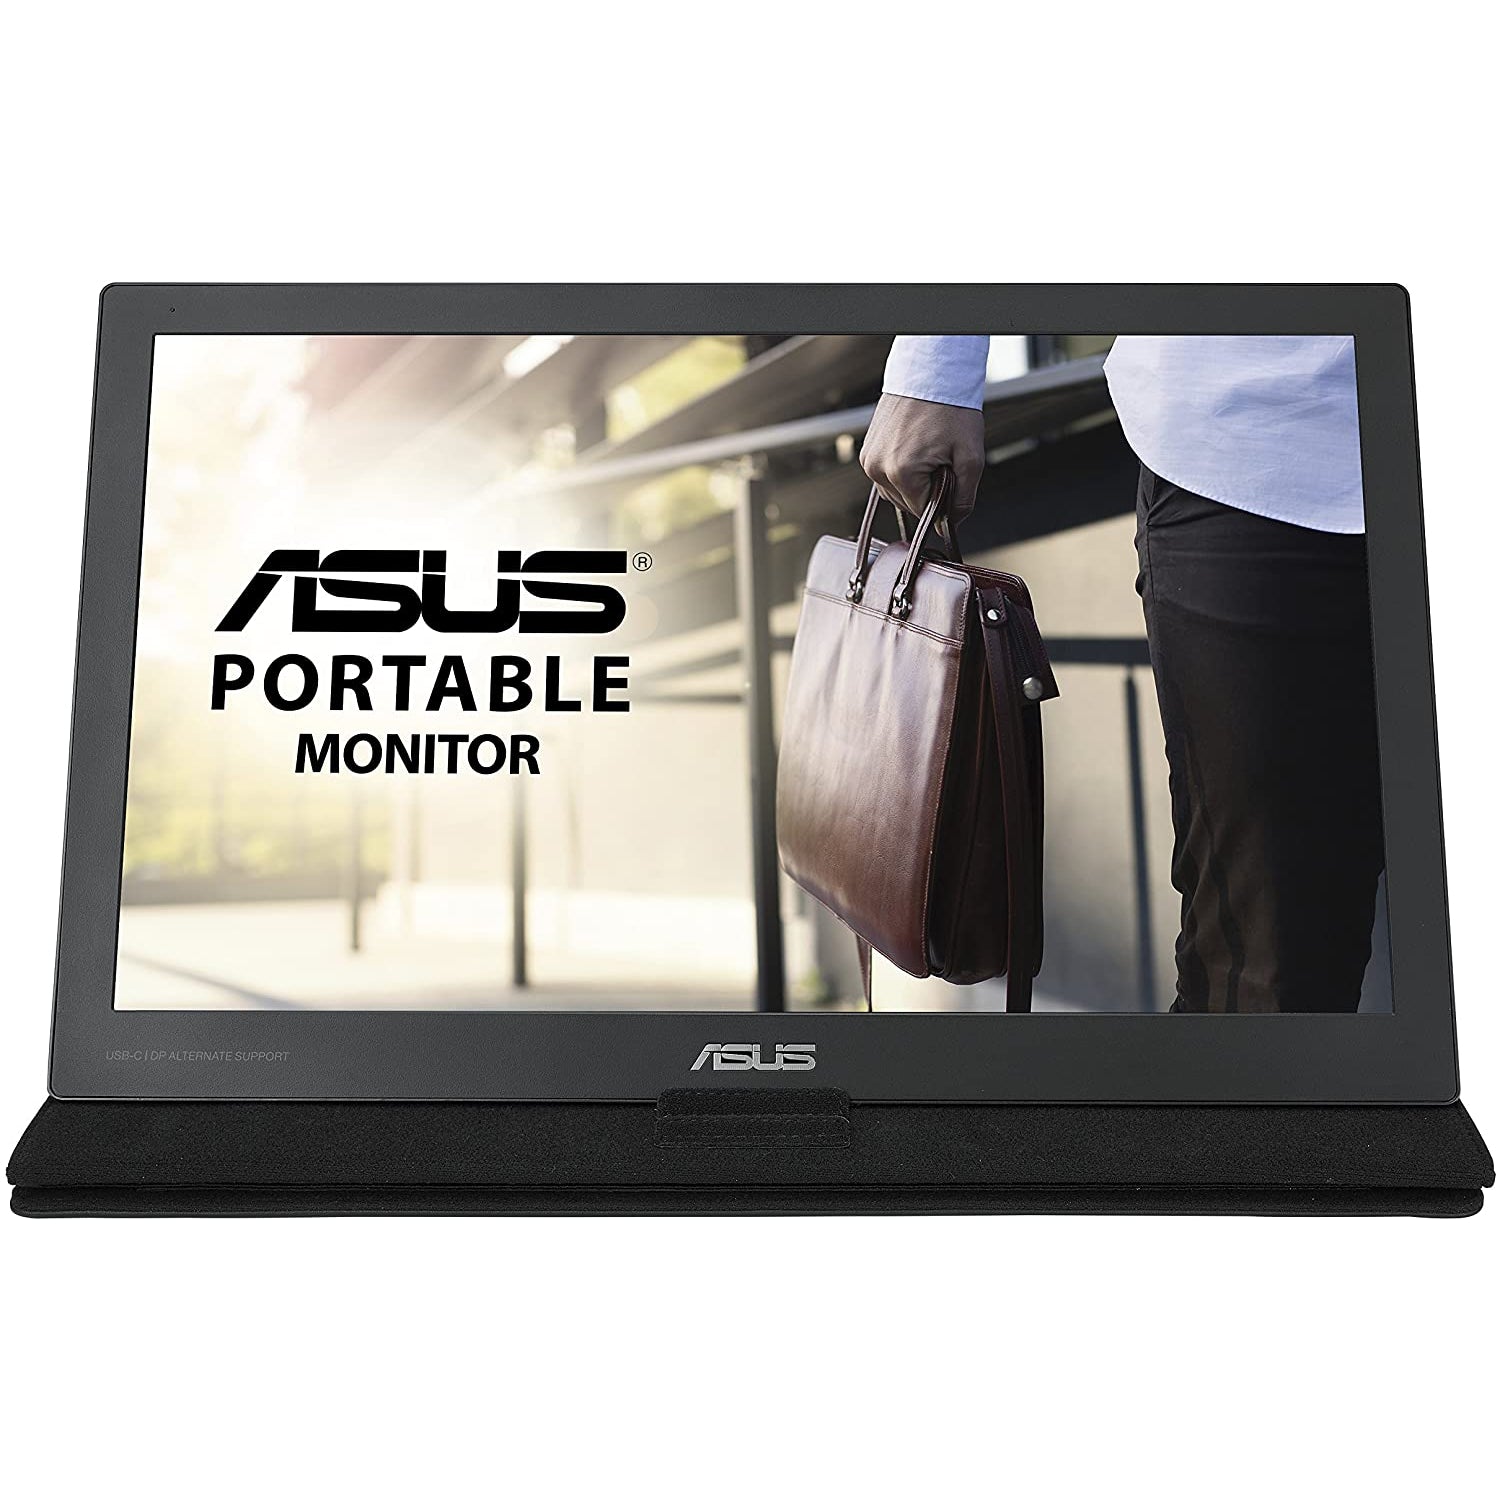 ASUS MB169 15.6" USB Type-C Portable Monitor